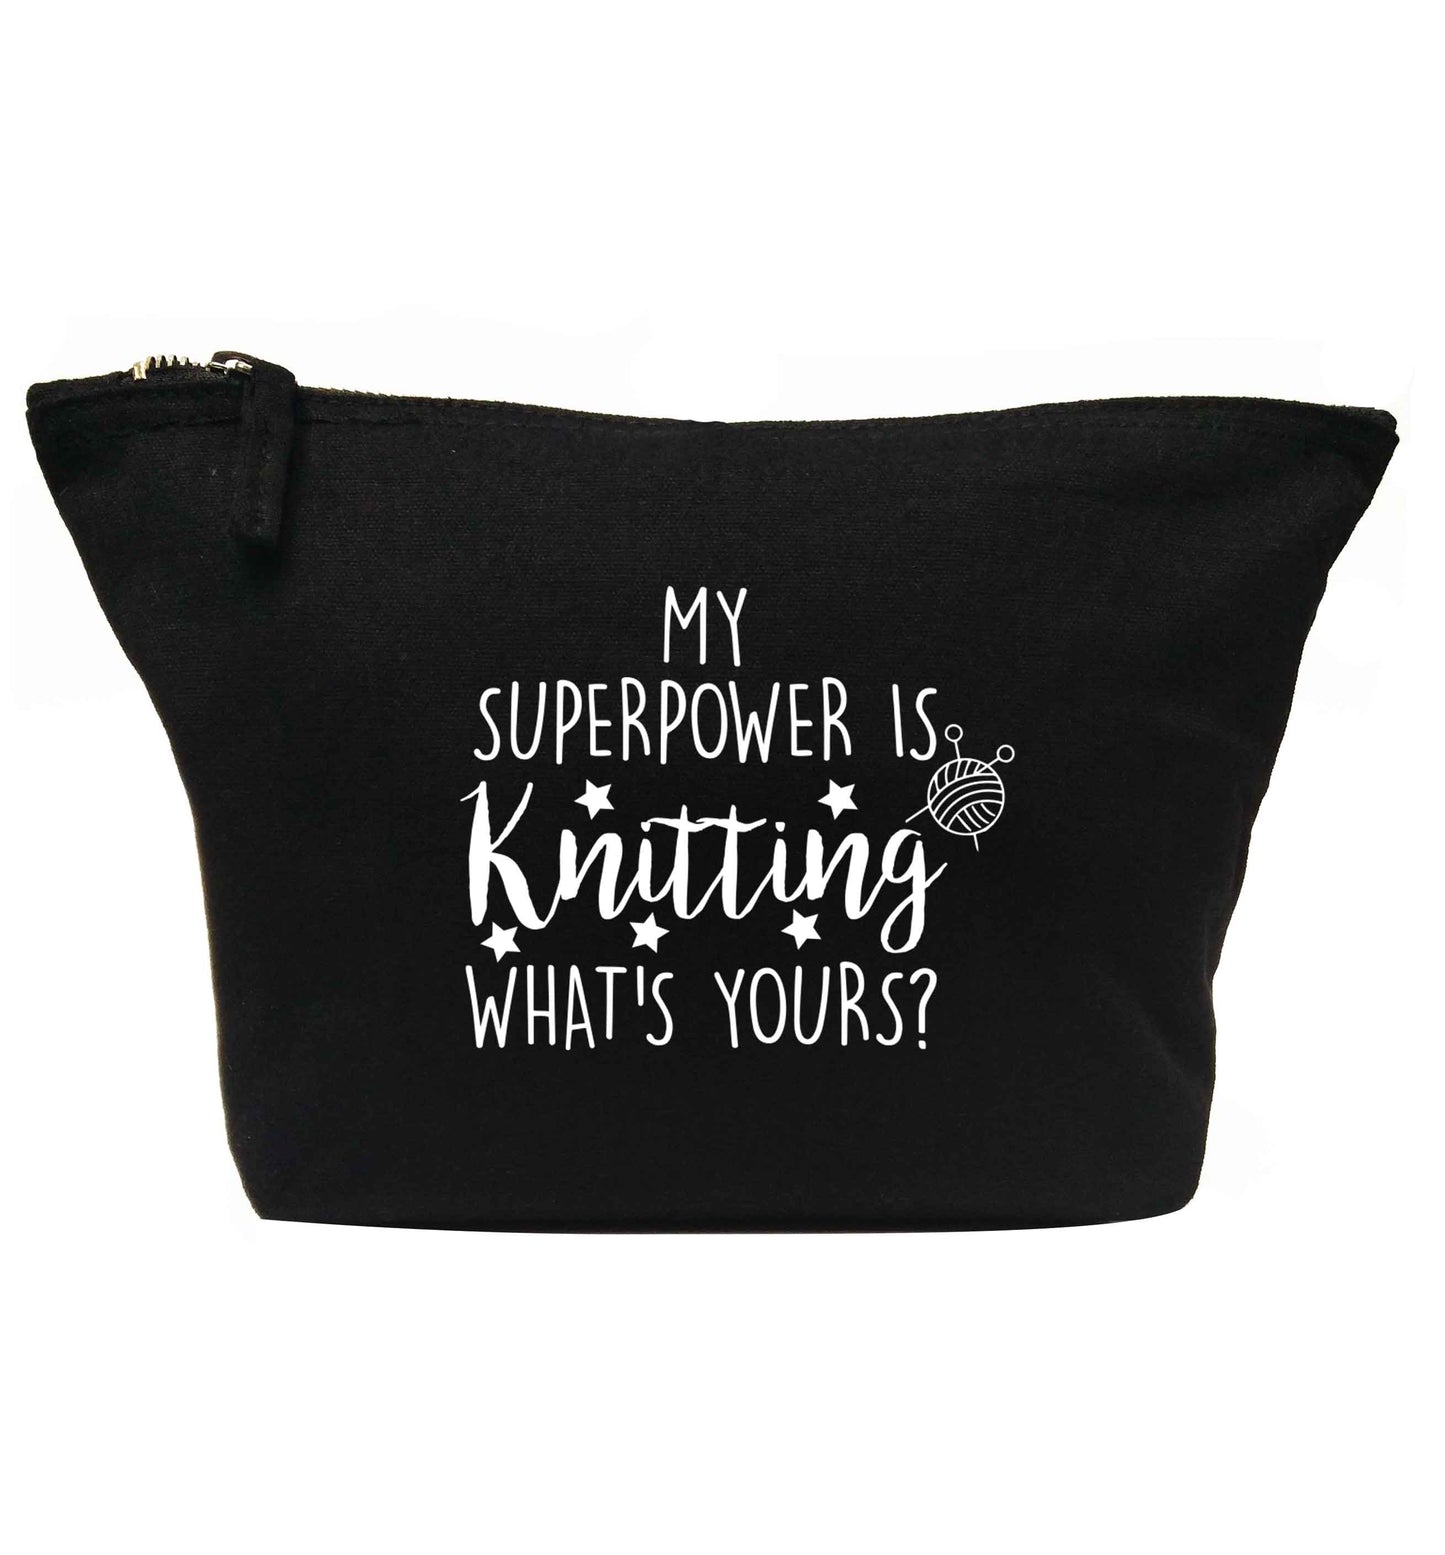 My superpower is knitting what's yours? | Makeup / wash bag